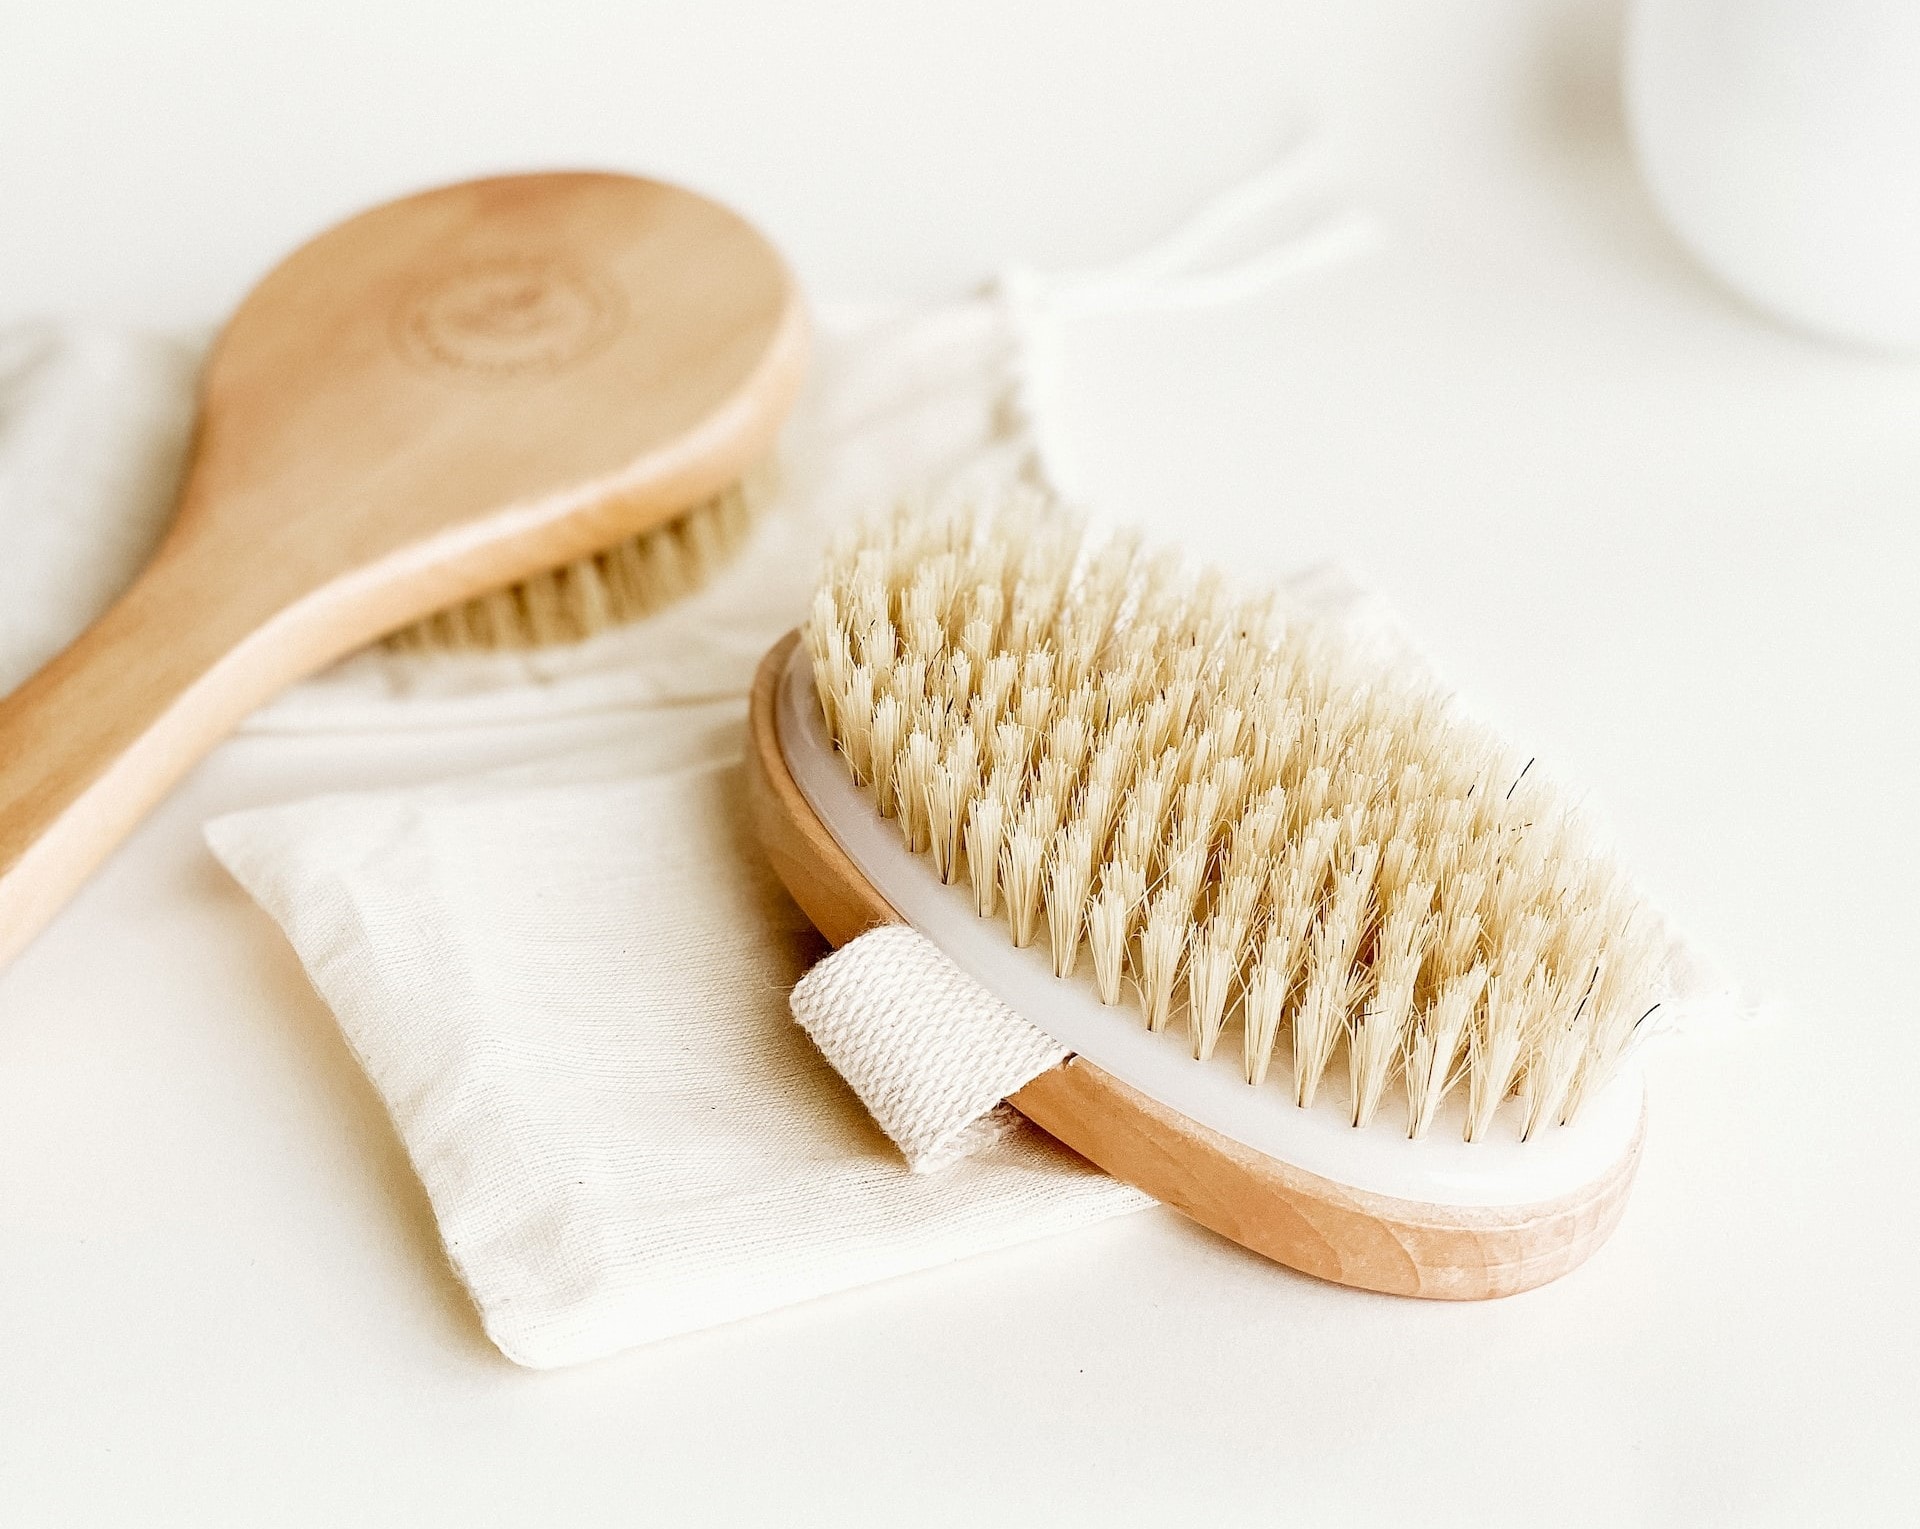 Wet and dry body brushing – which will work better for you?